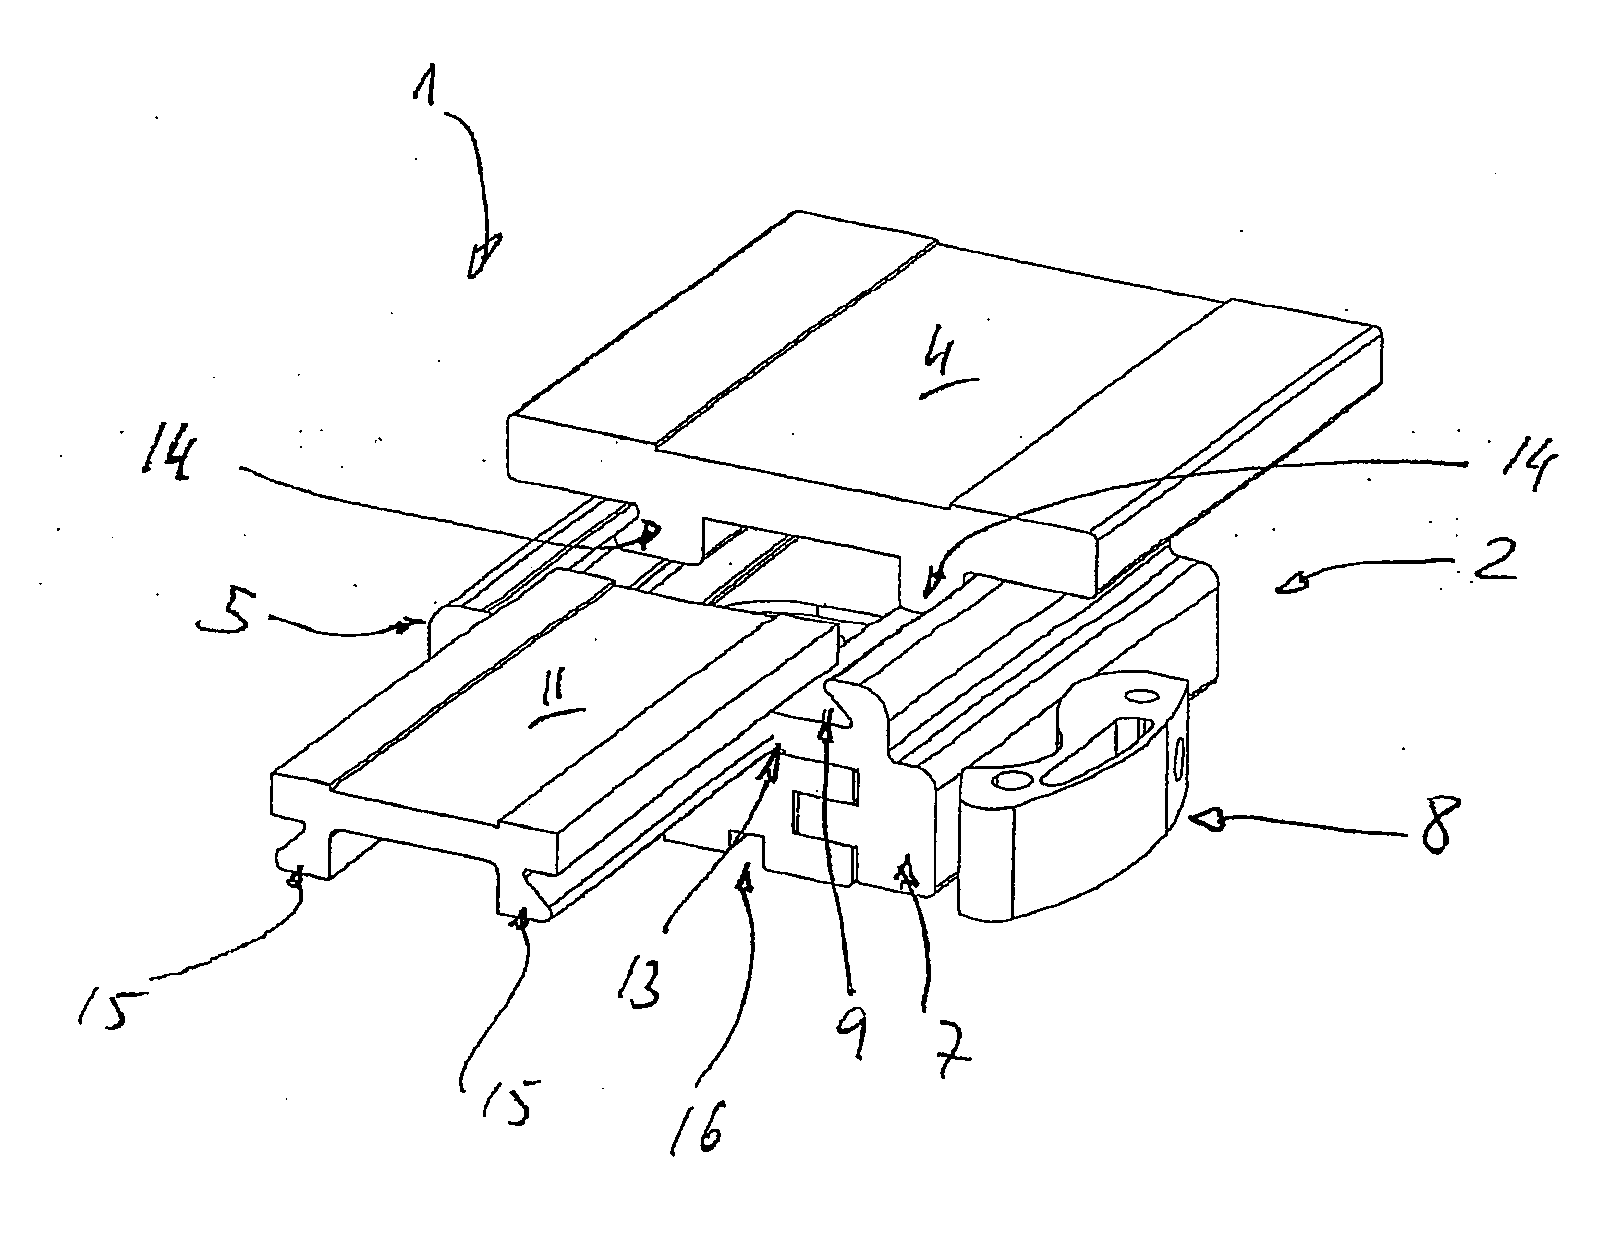 Mounting arrangement for optical devices